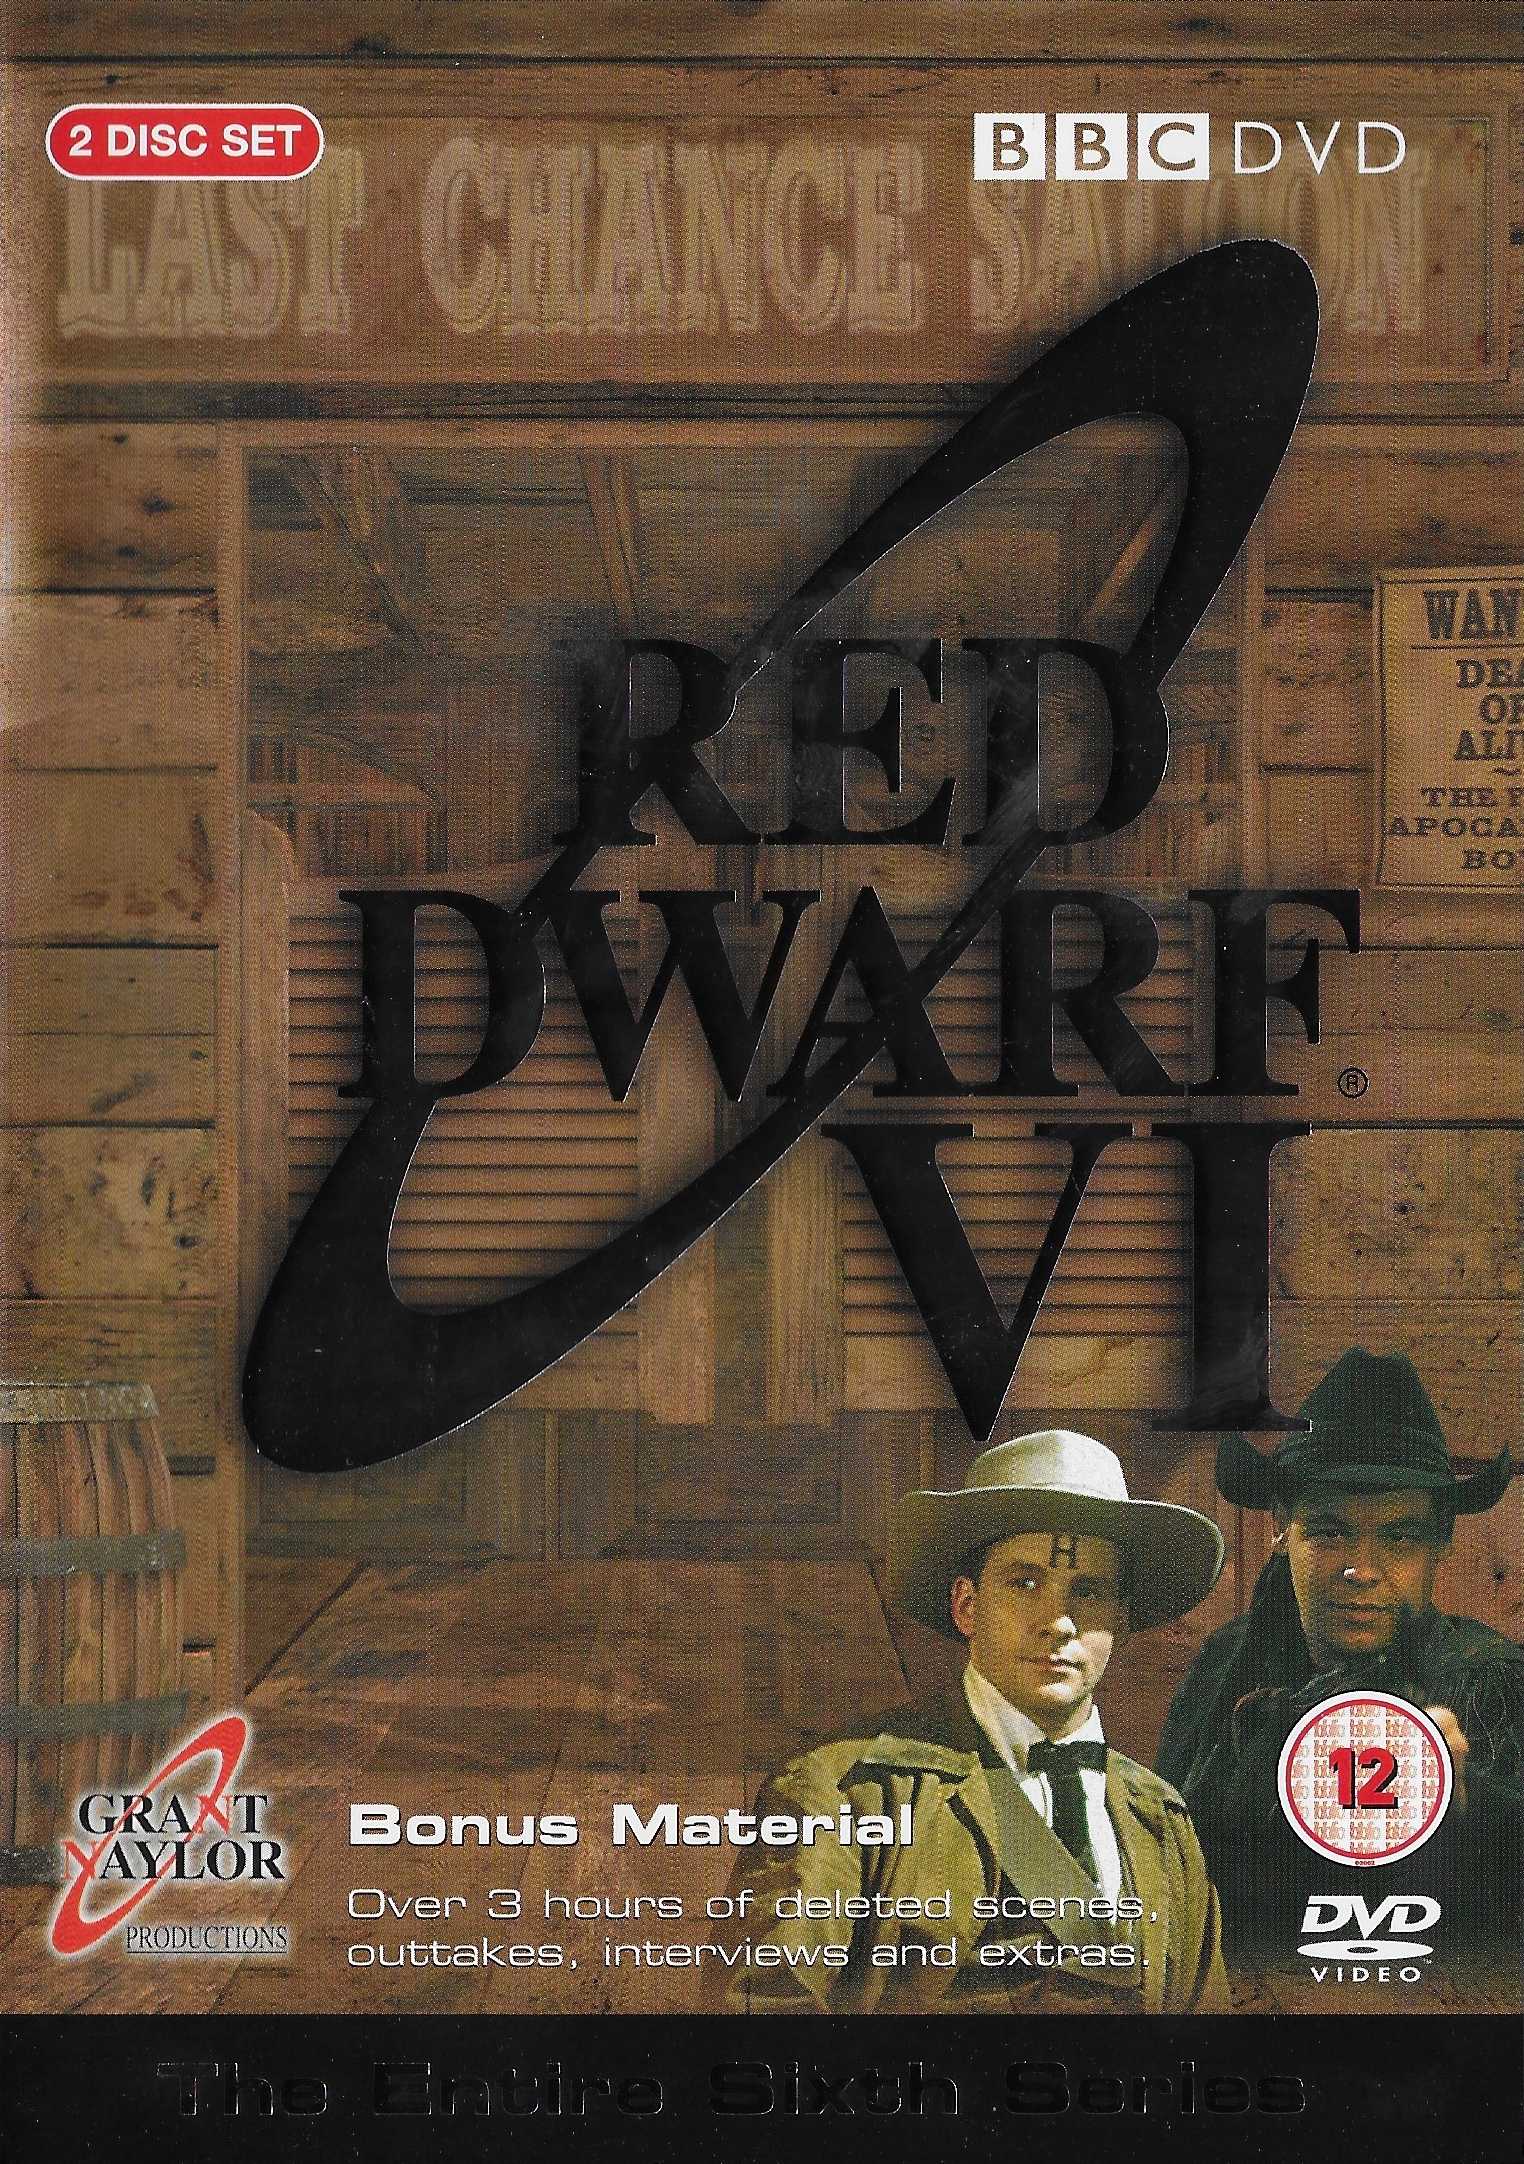 Picture of BBCDVD 1372 Red dwarf - Series VI by artist Rob Grant / Doug Naylor from the BBC dvds - Records and Tapes library